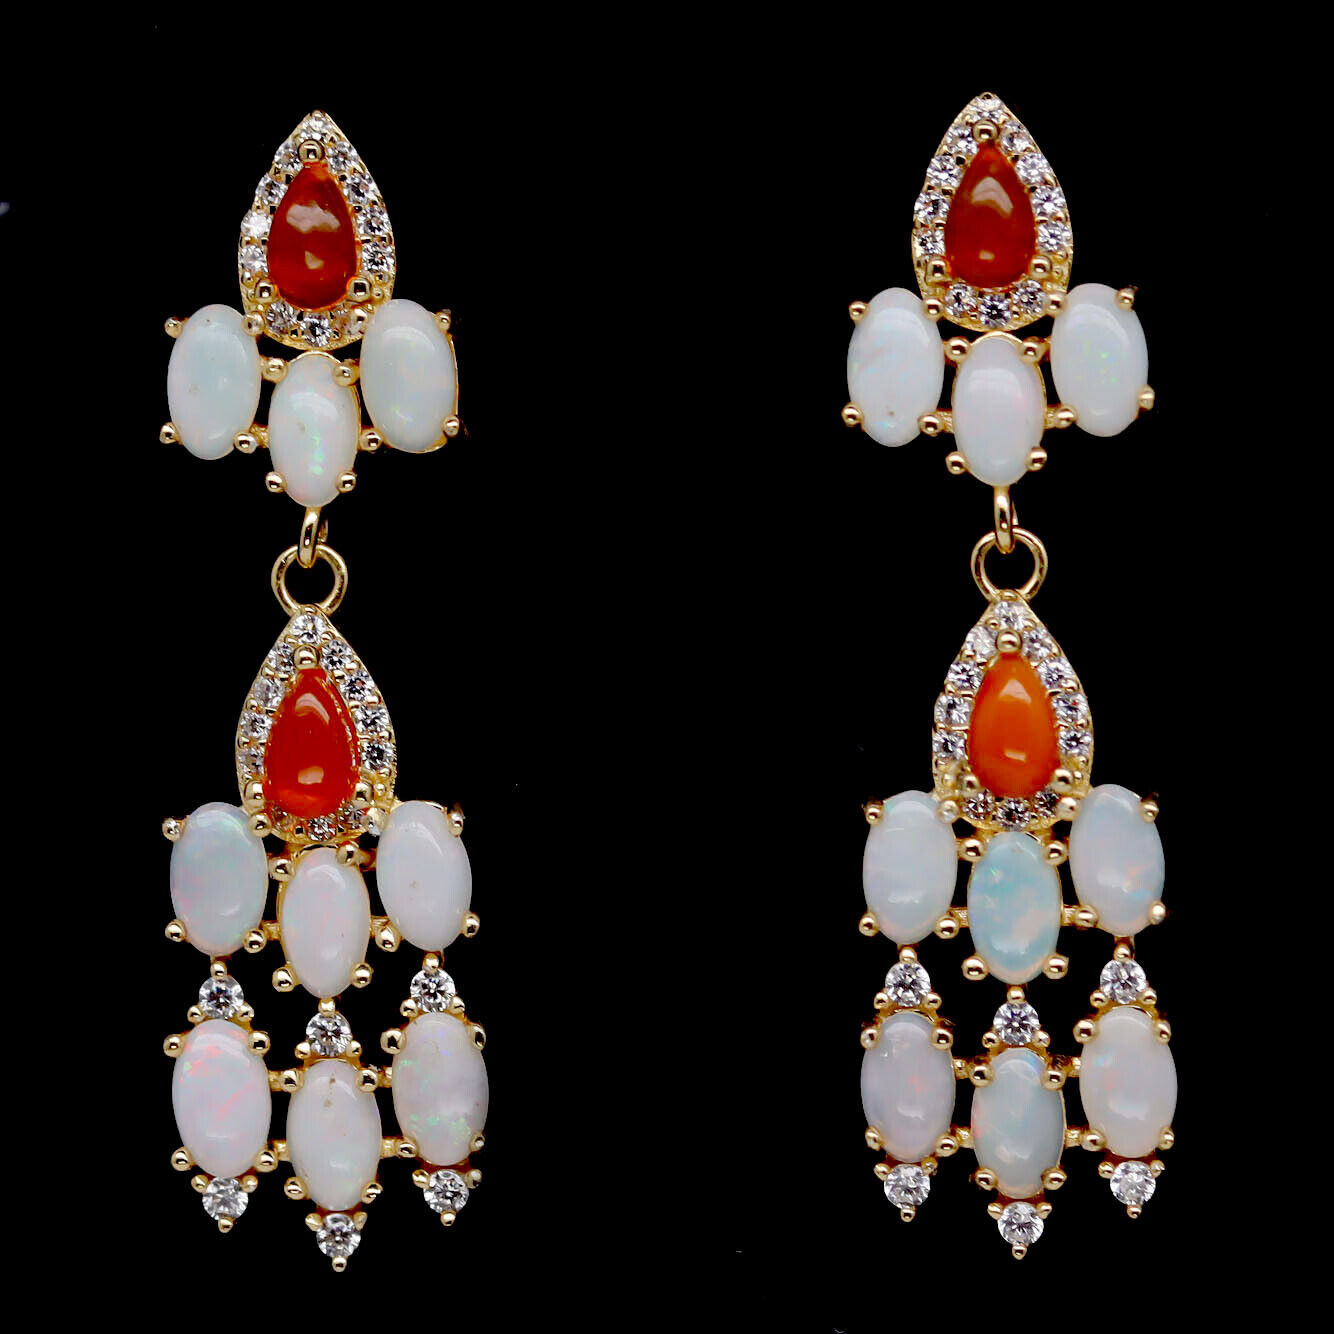 A pair of gold on 925 silver drop earrings set with cabochon cut opal and fire opal, L. 3.8cm.